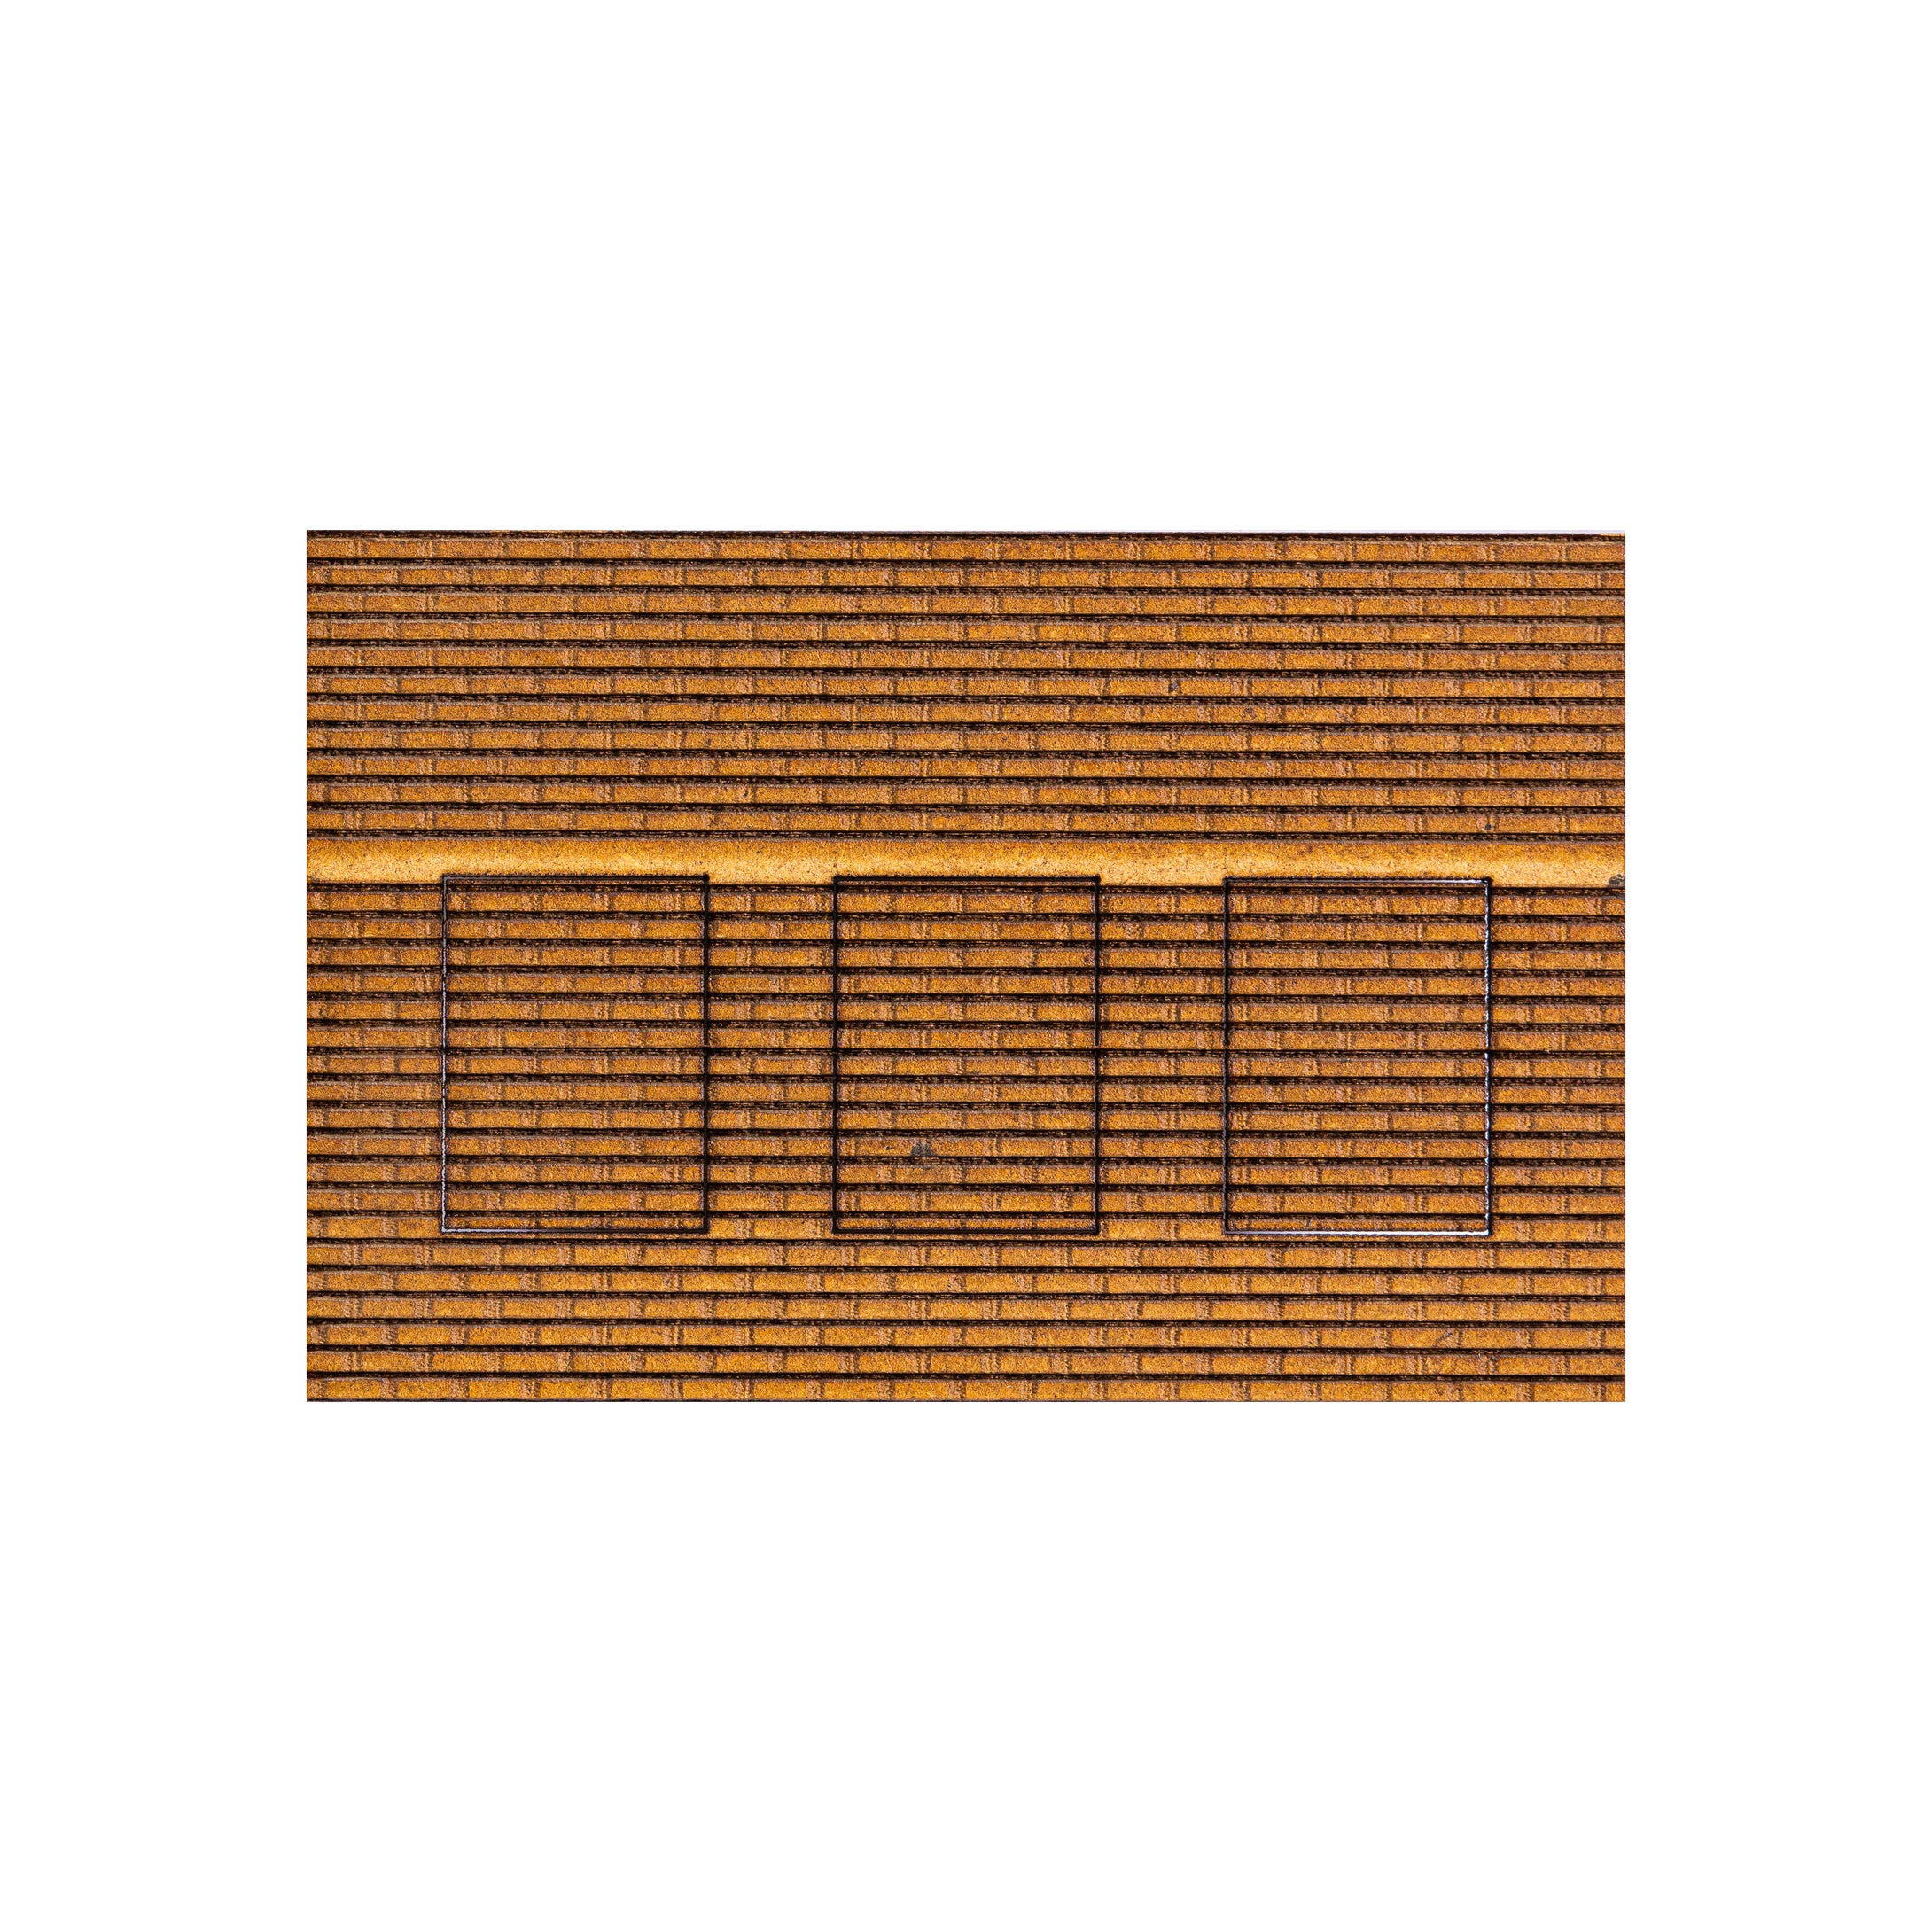 LP028 - HO Scale - Brick panel insert 3 window openings - fits opening size A